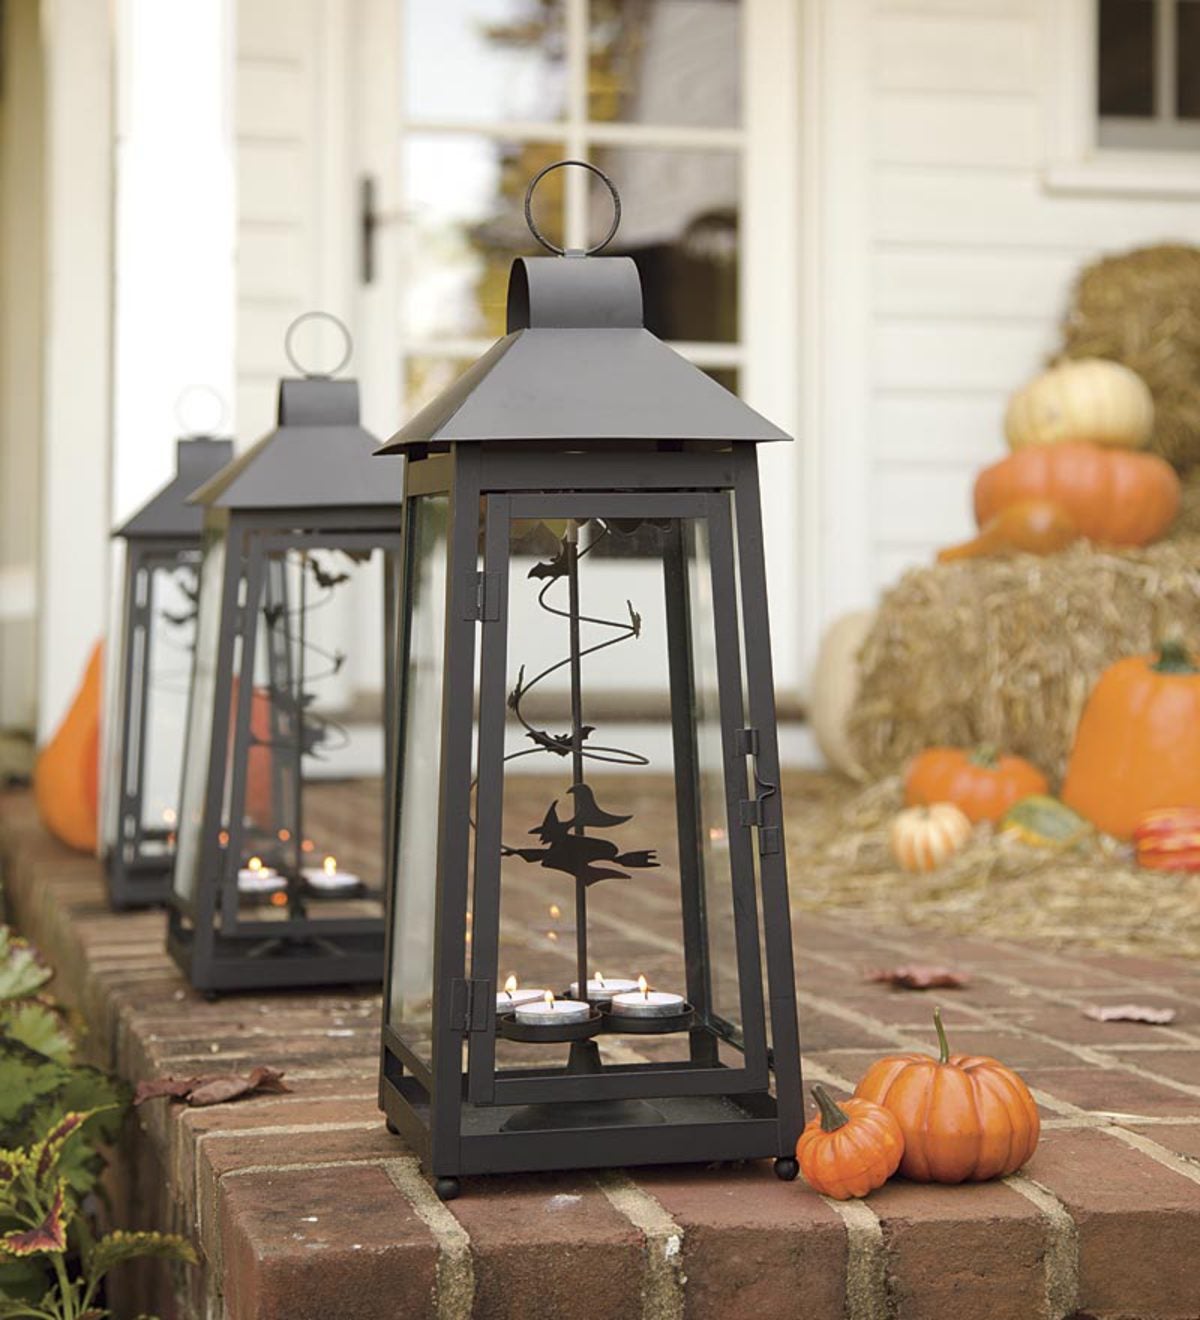 Witch And Bat Twirling Halloween Lantern | Plow & Hearth